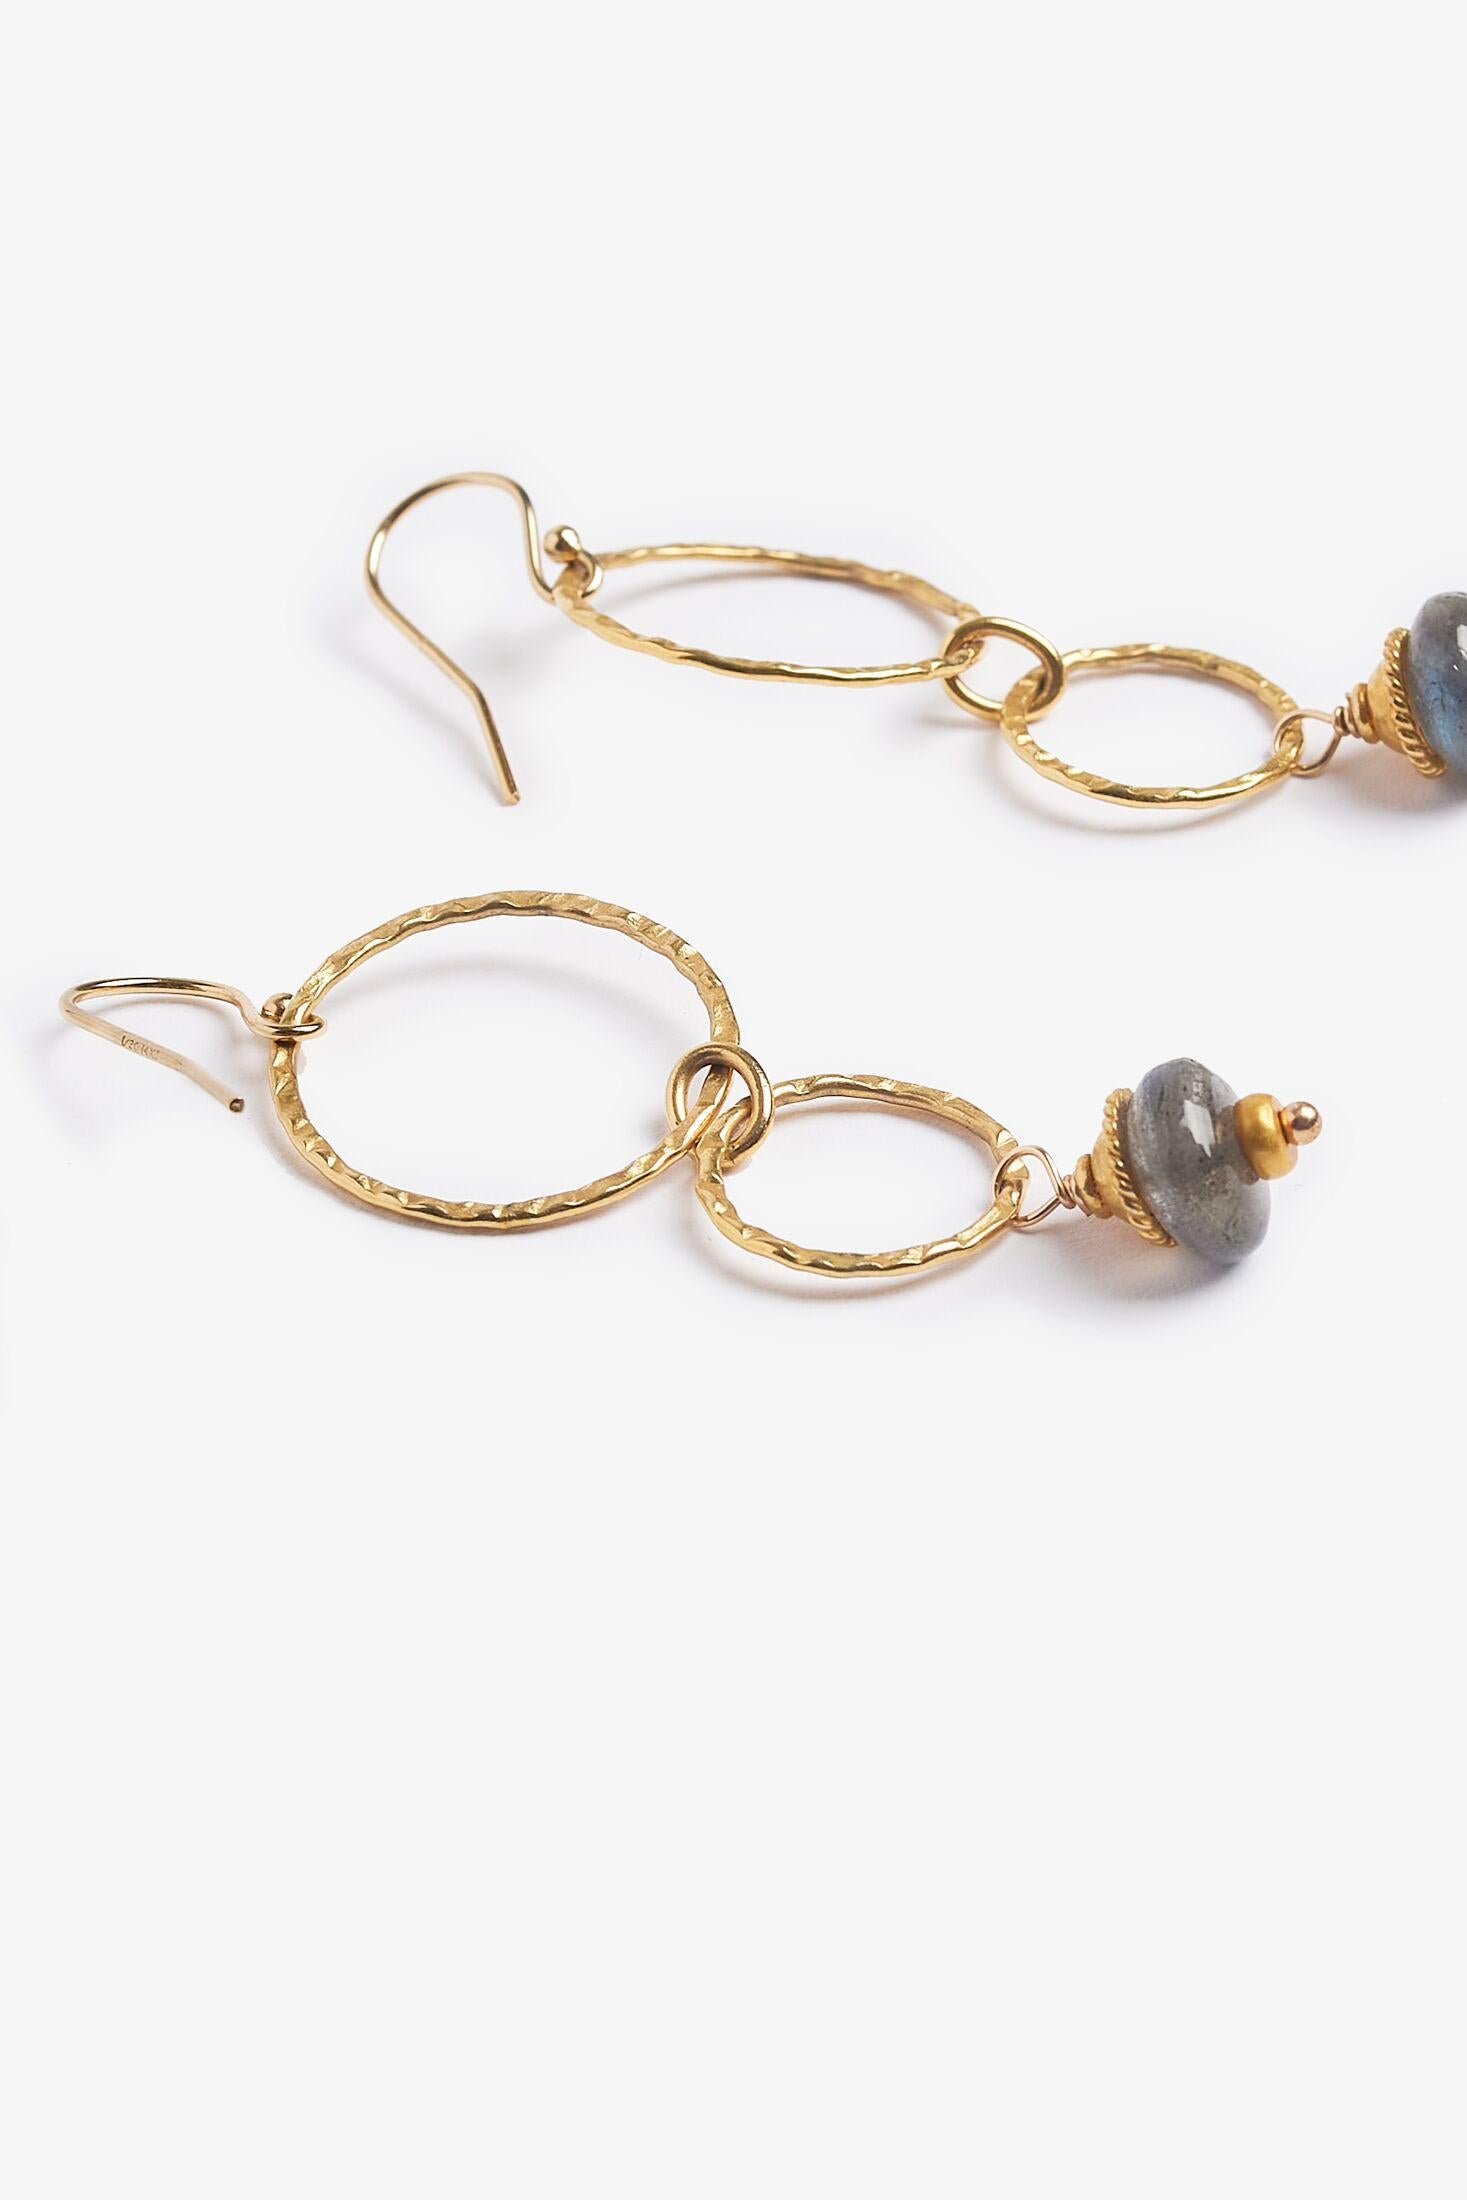 Story Behind the Jewelry
Labradorite is a grey iridescent stone with blue and green hues.  The handmade earrings are adorned with 14K hammered gold filled.  The earrings a perfect touch to any outfit.

Properties
Labradorite is a protective stone